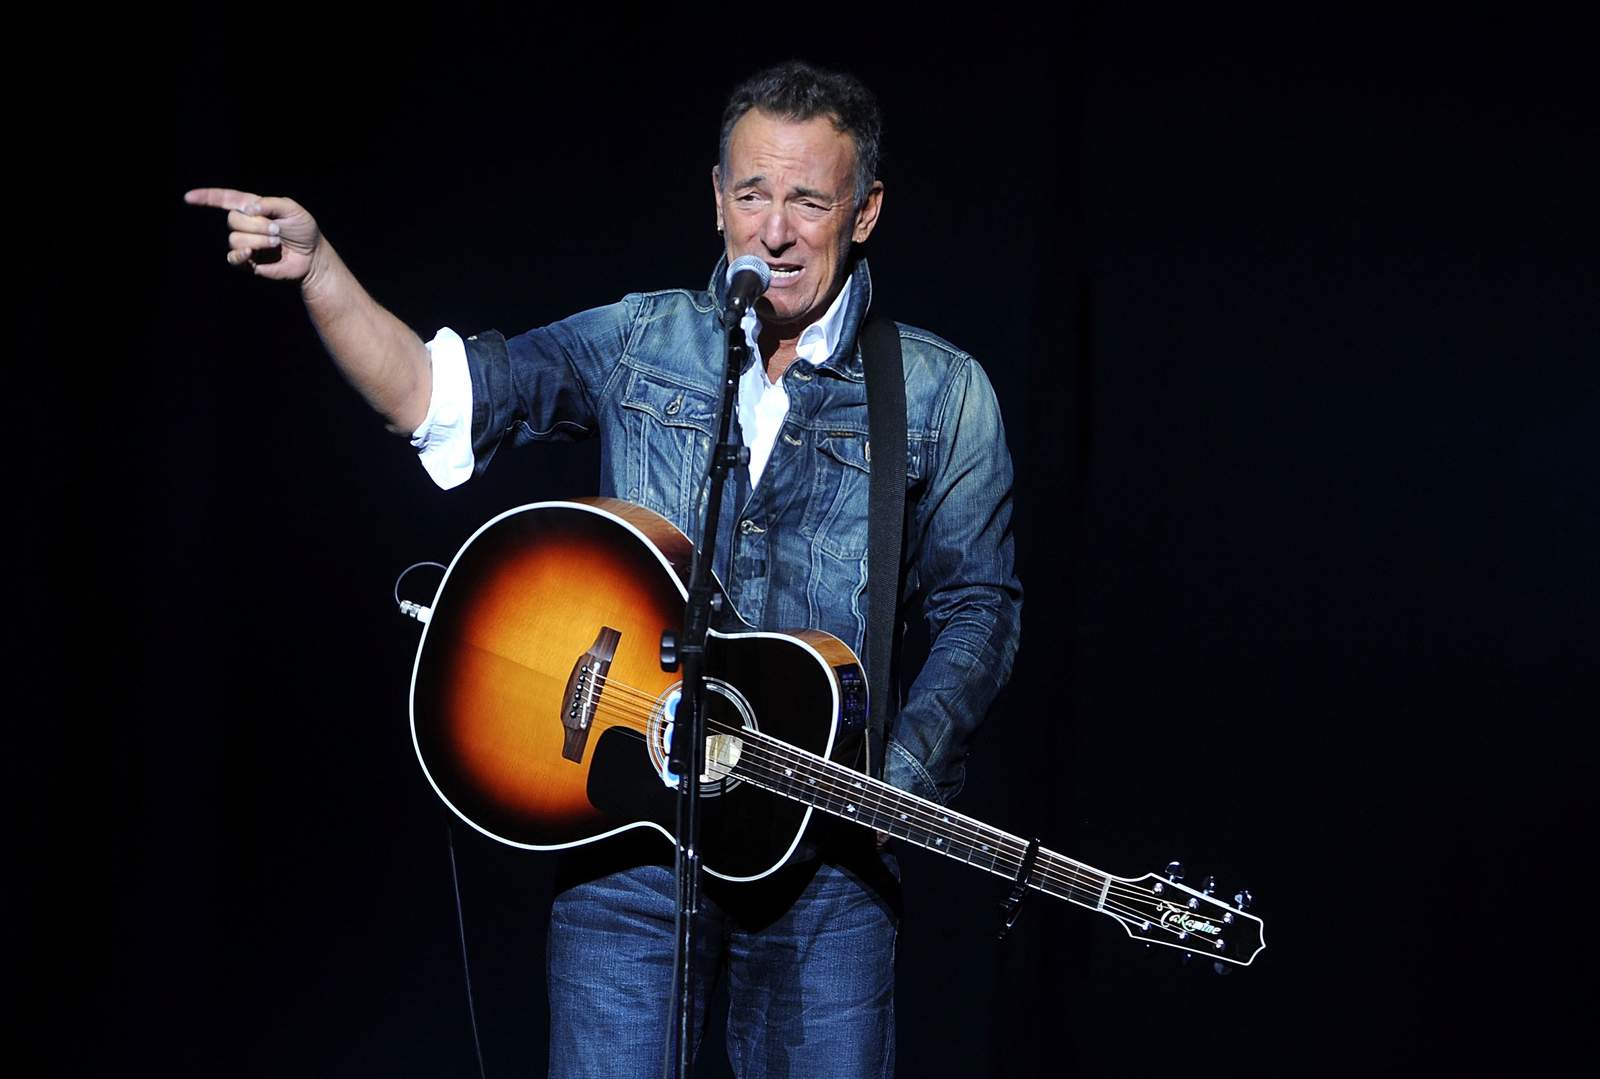 Springsteen charged with drunken driving; Jeep ad on pause